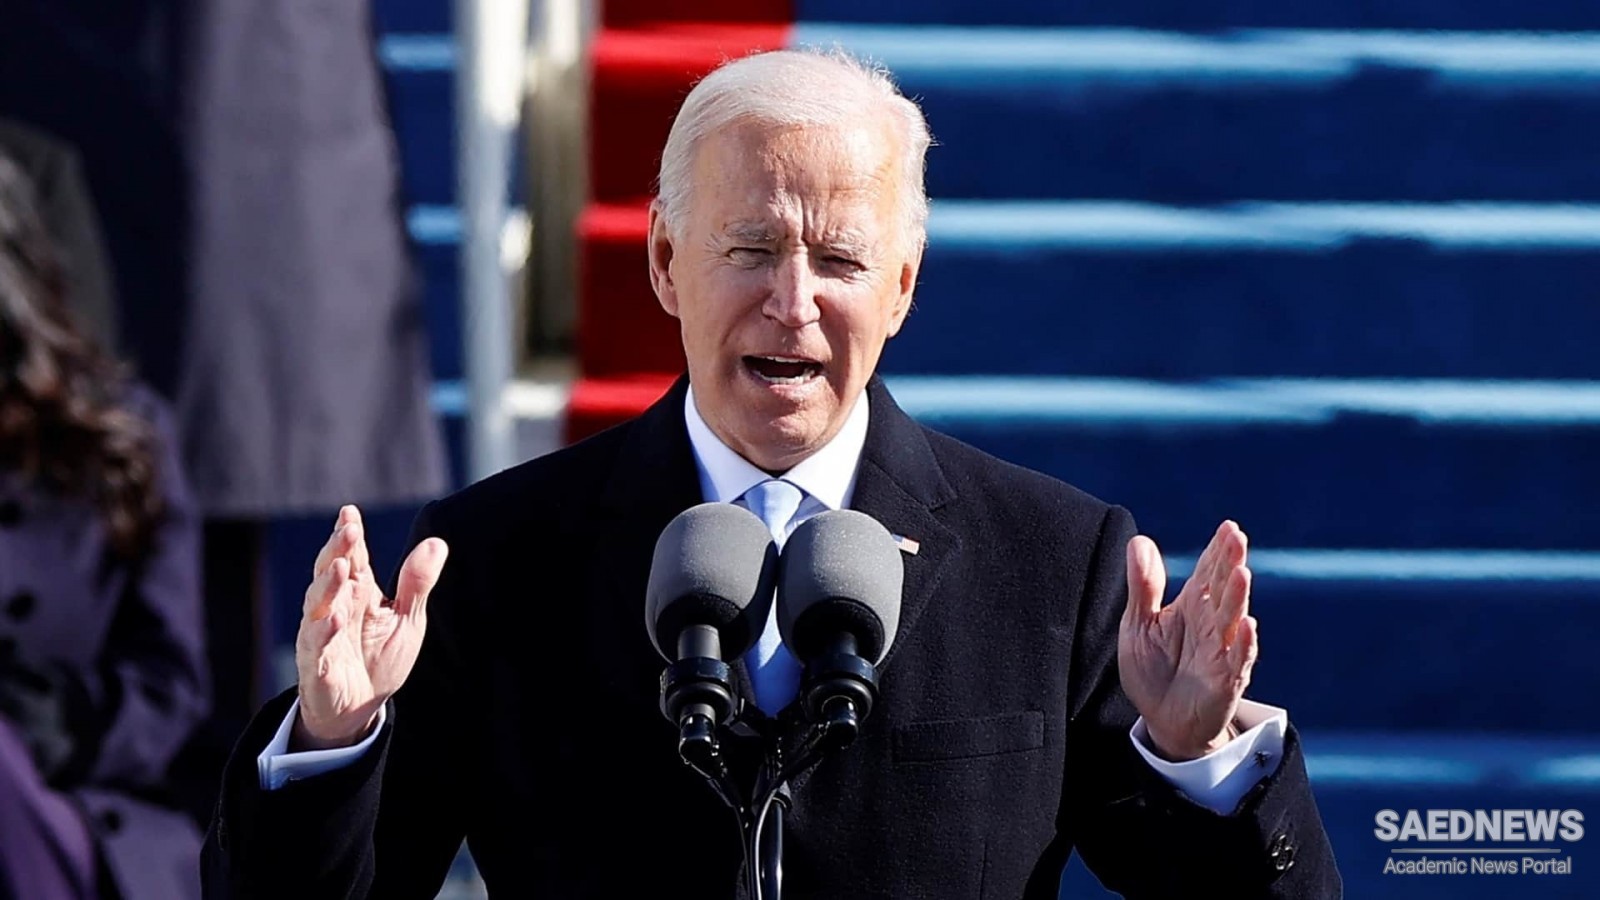 We Have Learned Again That Democracy Is Precious, President Joe Biden Says in His Inaugural Speech